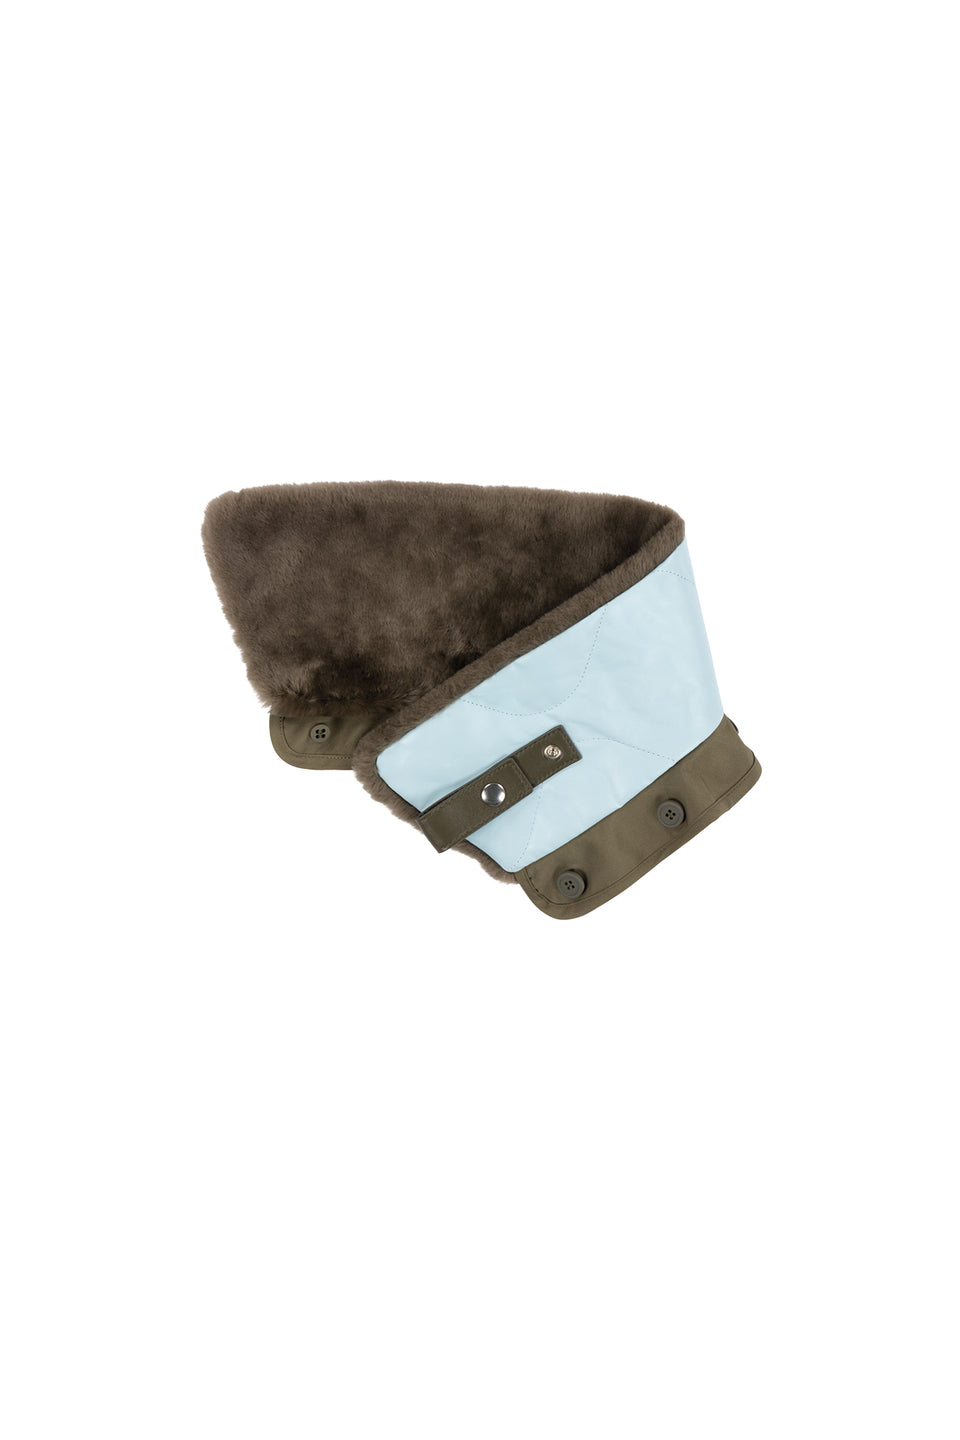 Aviator Collar - Olive / Sky Blue (listing page thumbnail)